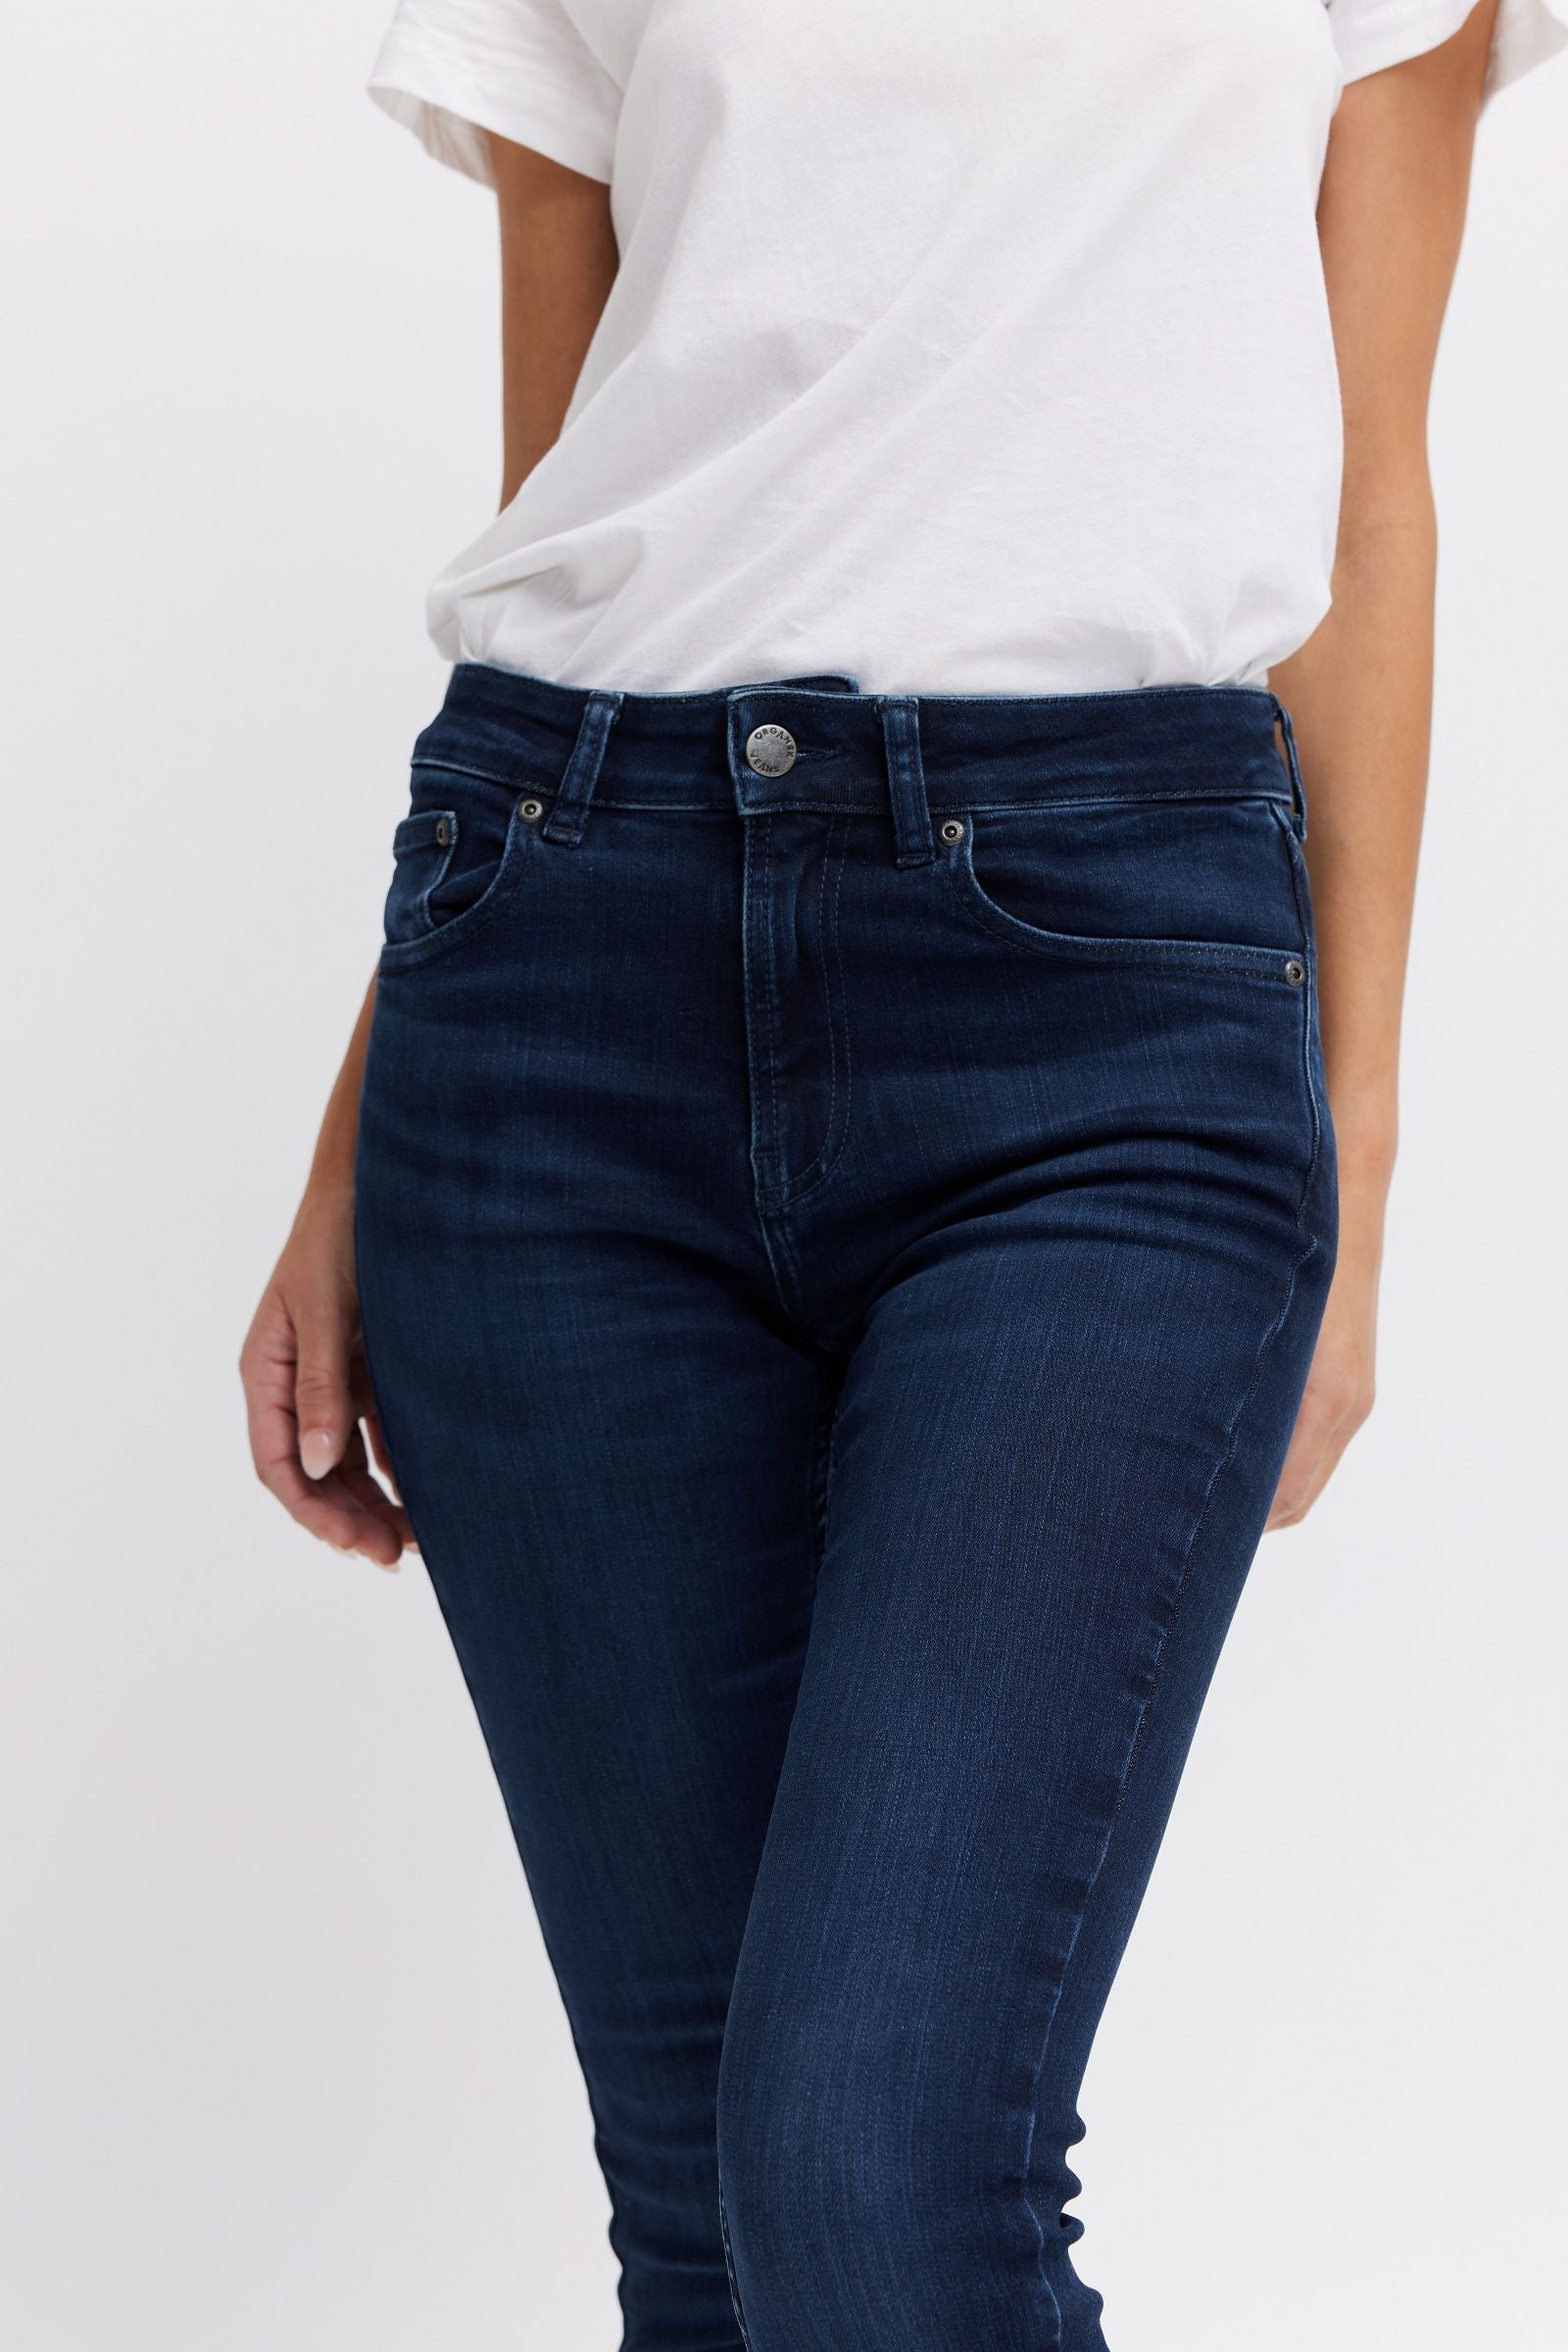 Best ethically made jeans for women